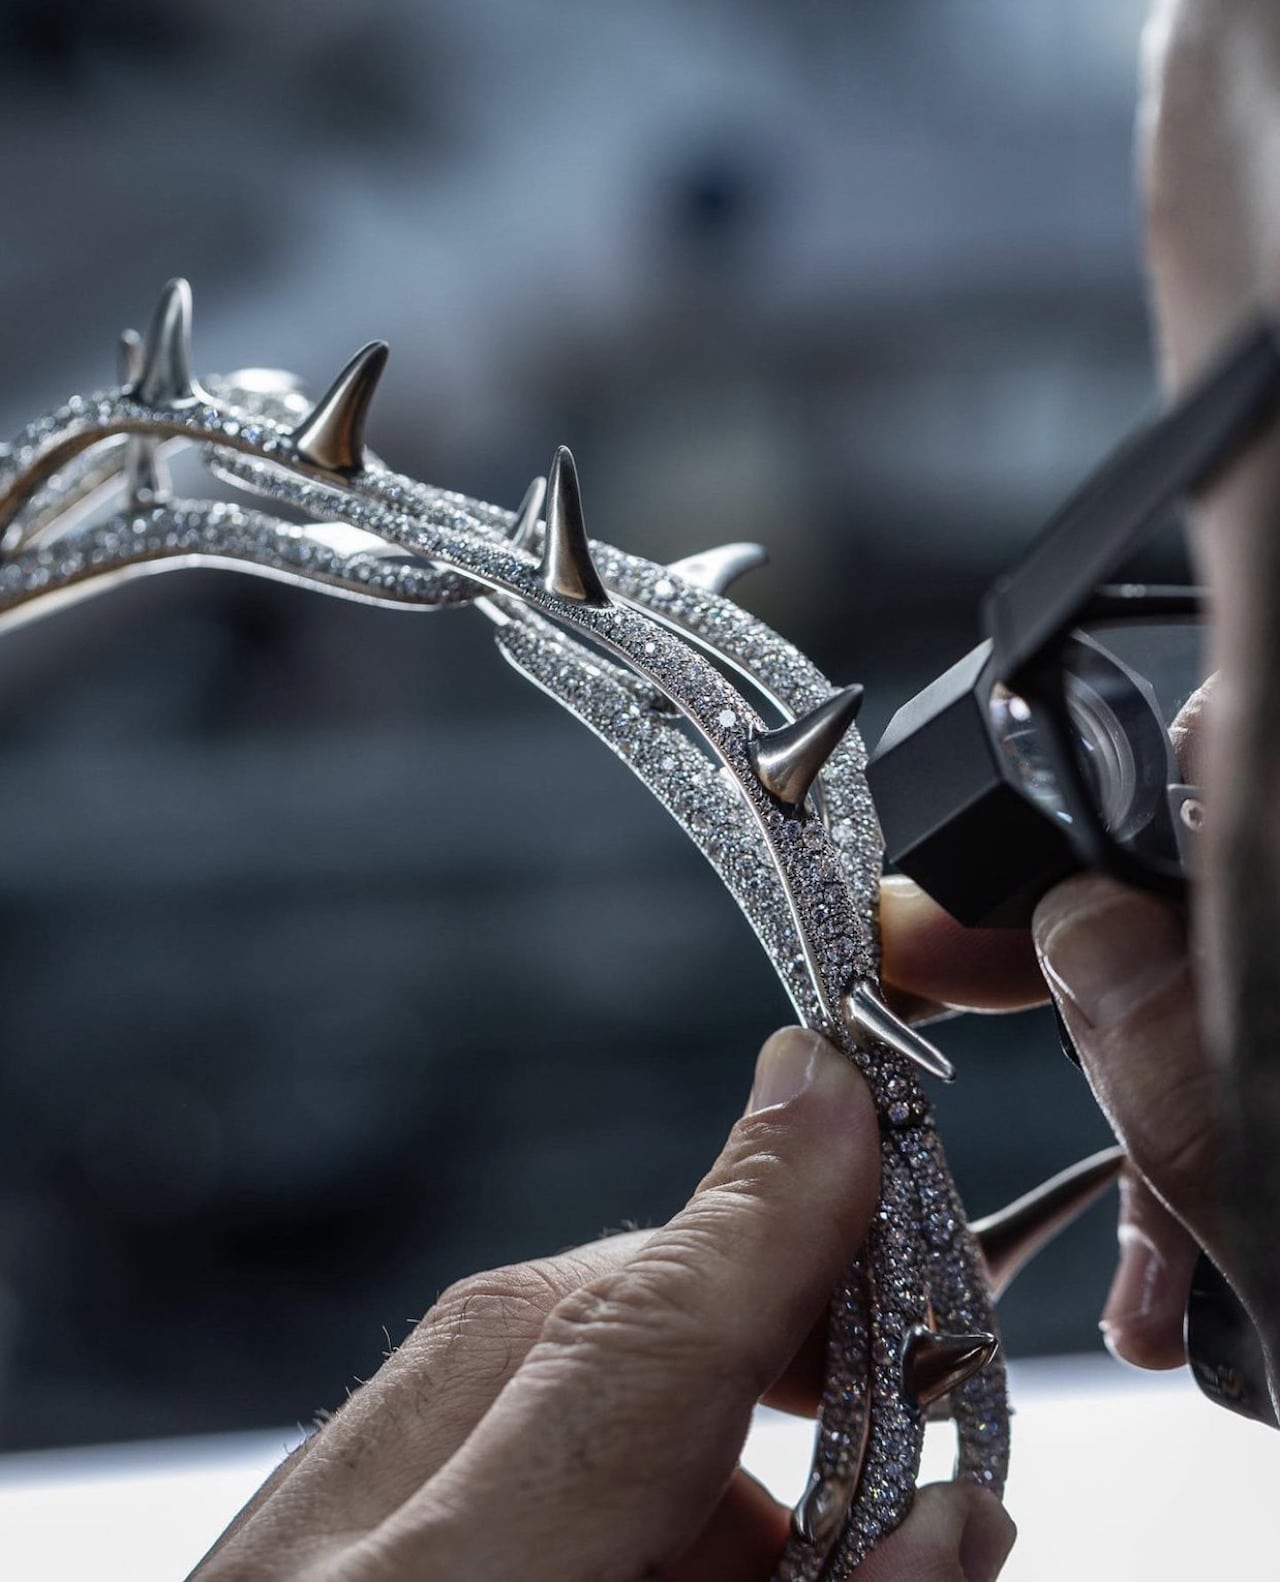 Kendrick Lamar Collaborates With Tiffany & Co. To Create The 'Crown Of  Thorns